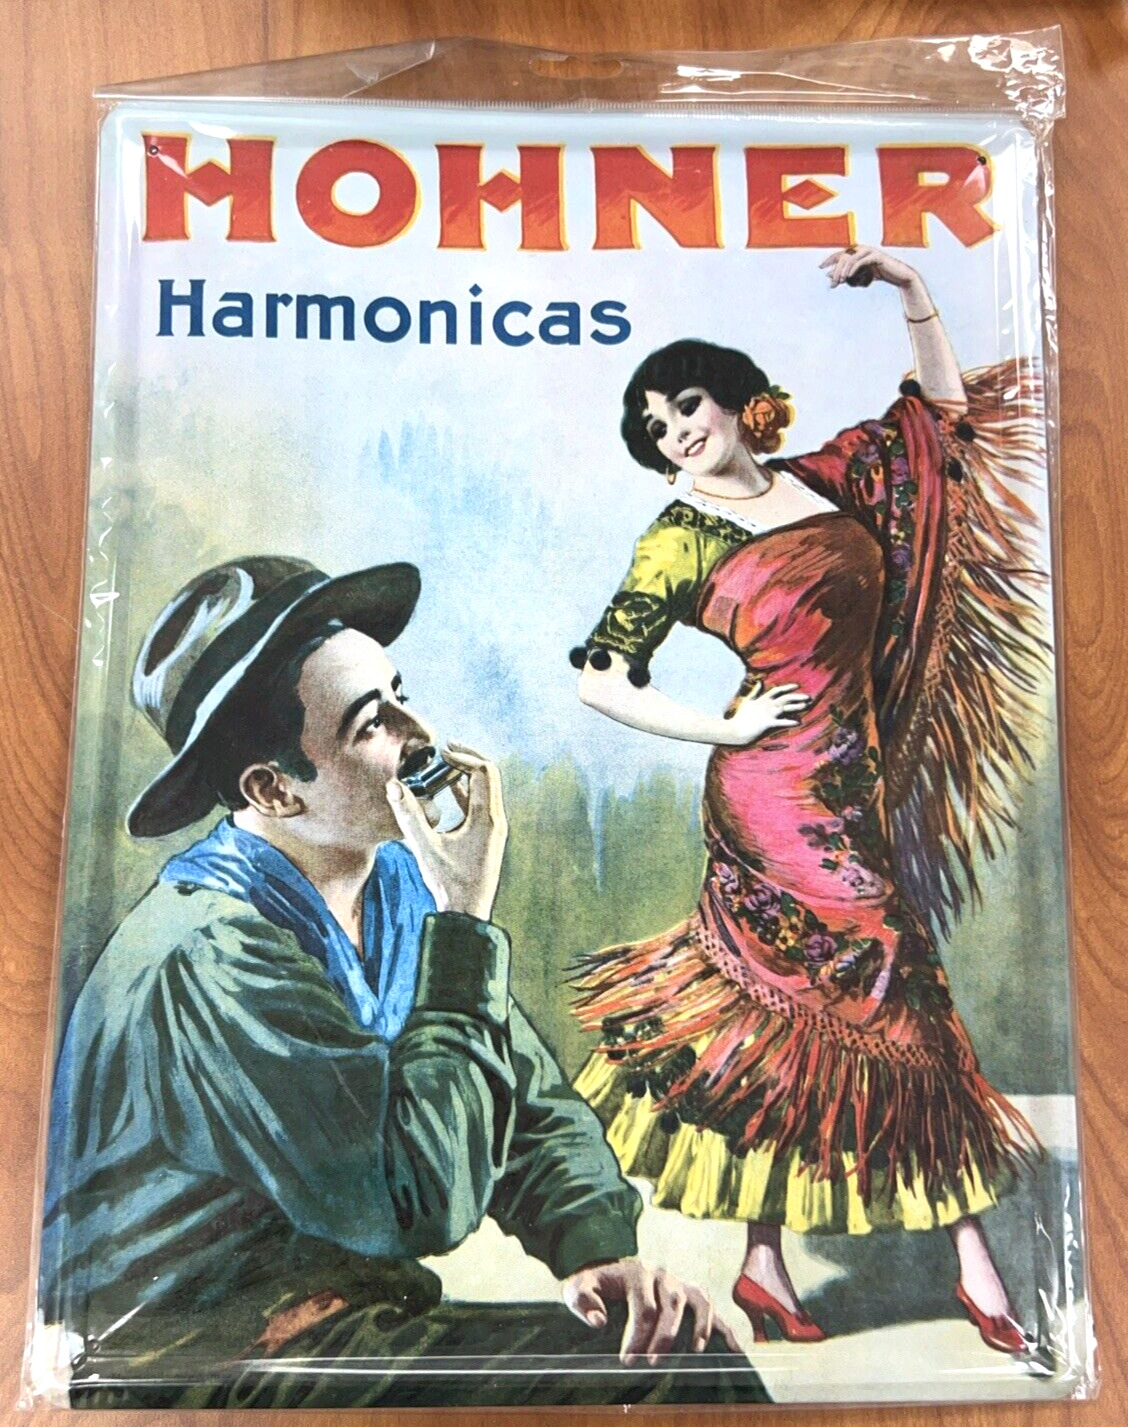 Vintage Hohner Harmonicas Metal Sign - Reproduction